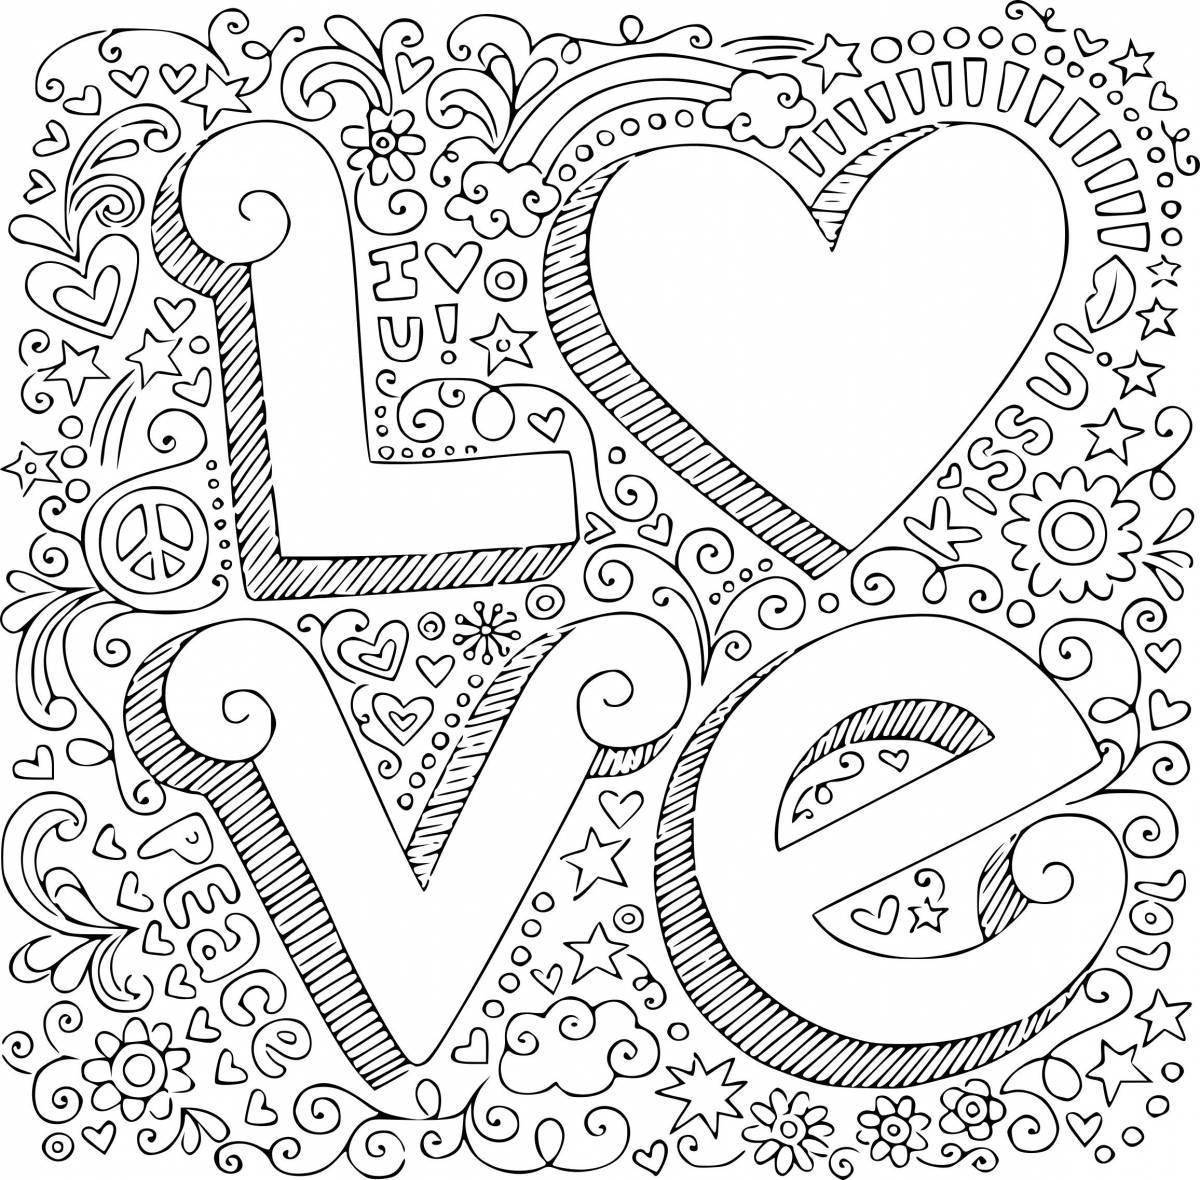 Adorable 18 year old coloring pages